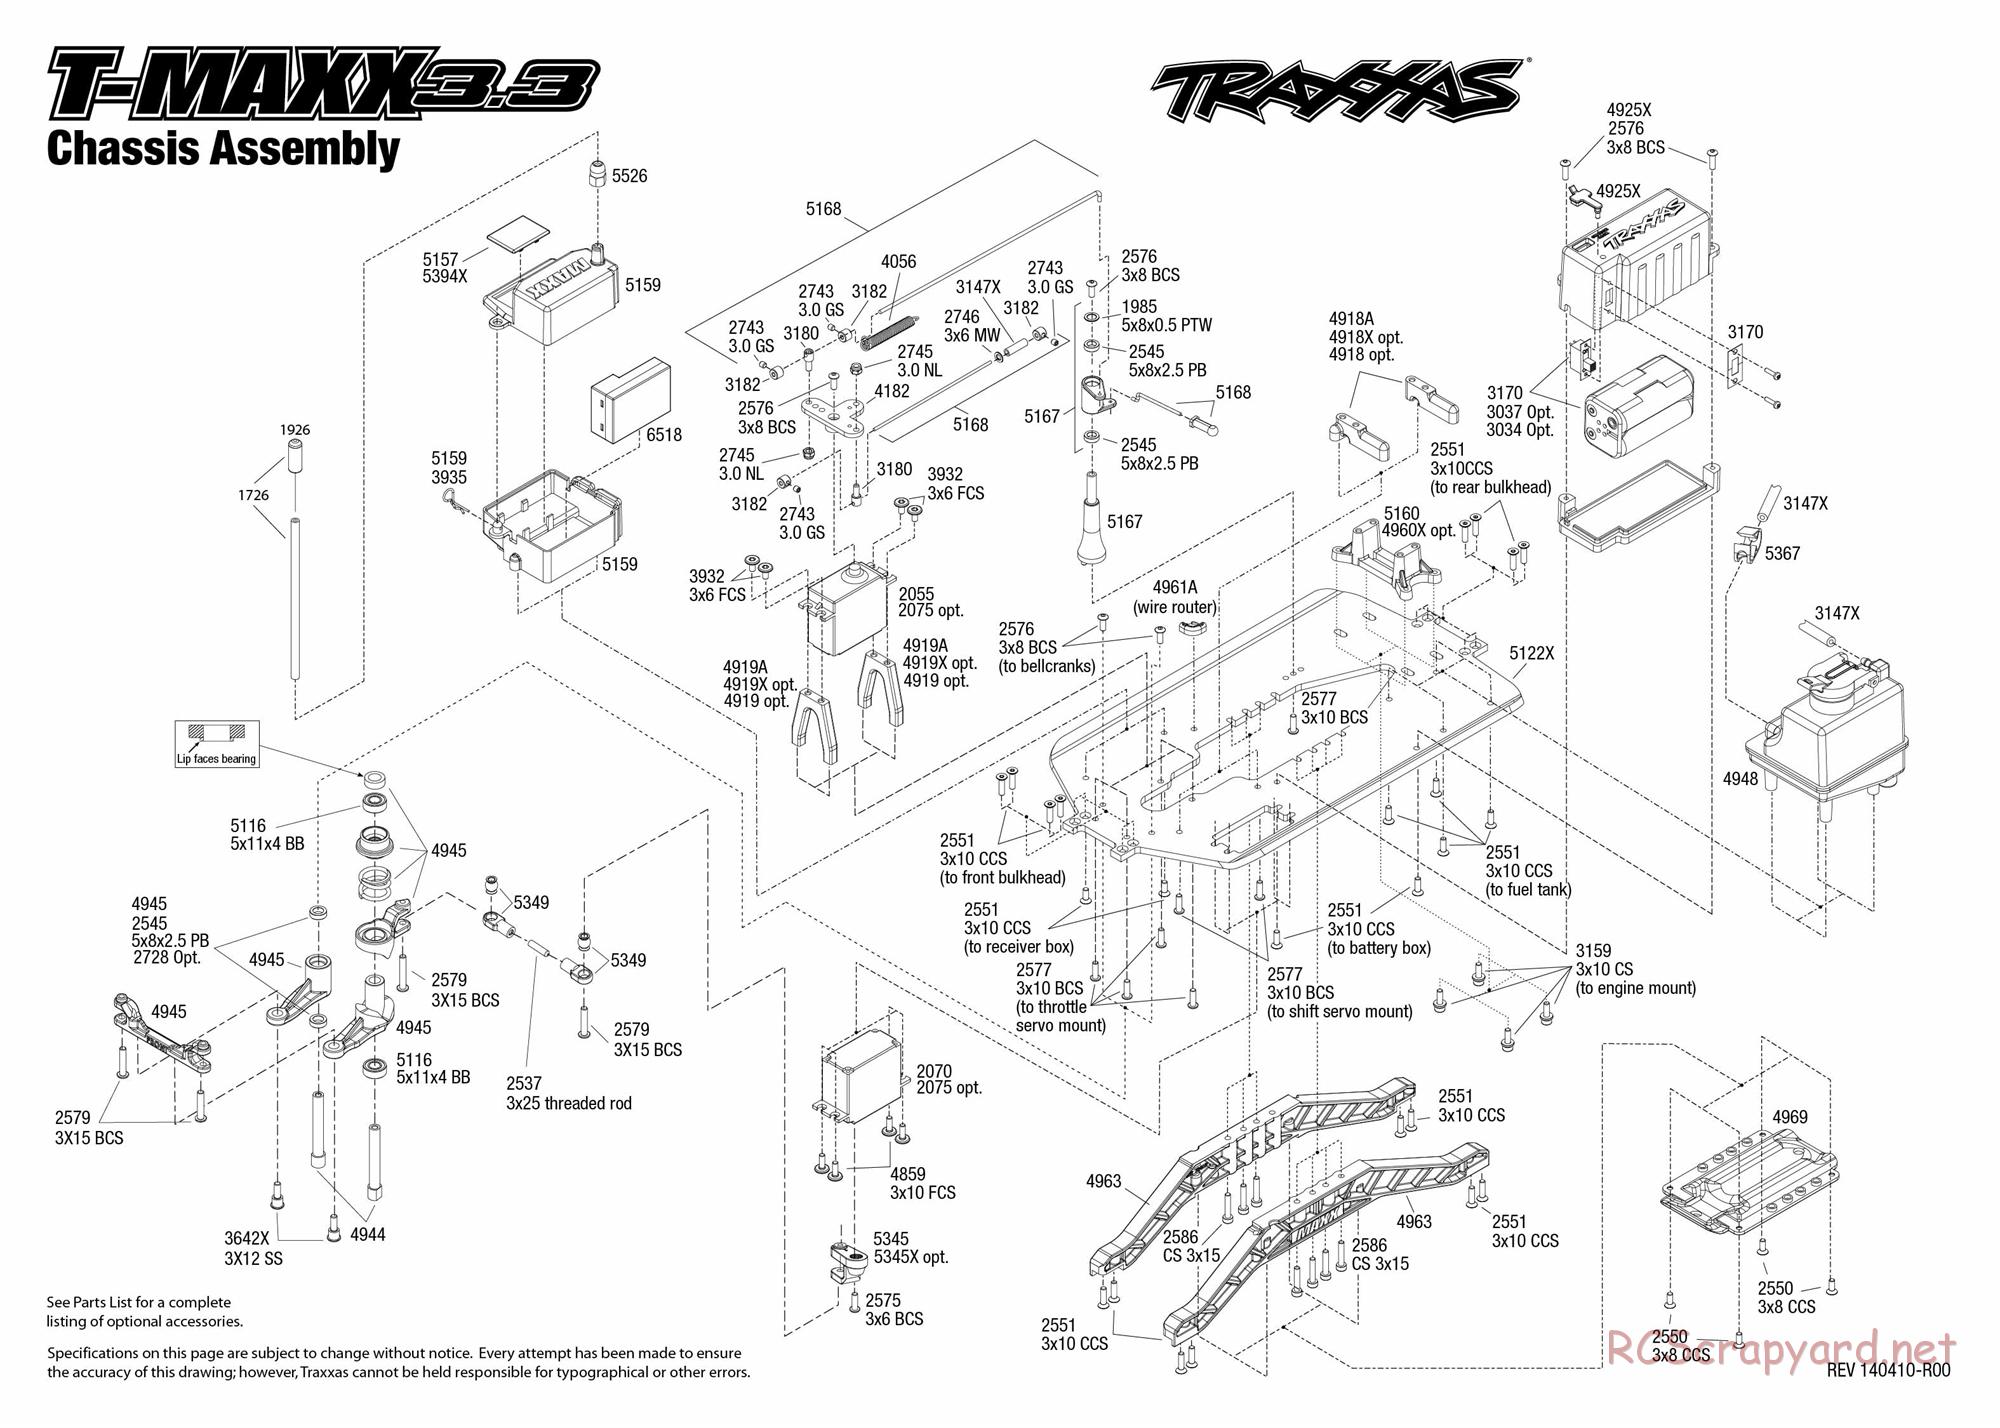 Traxxas - T-Maxx 3.3 (2014) - Exploded Views - Page 1